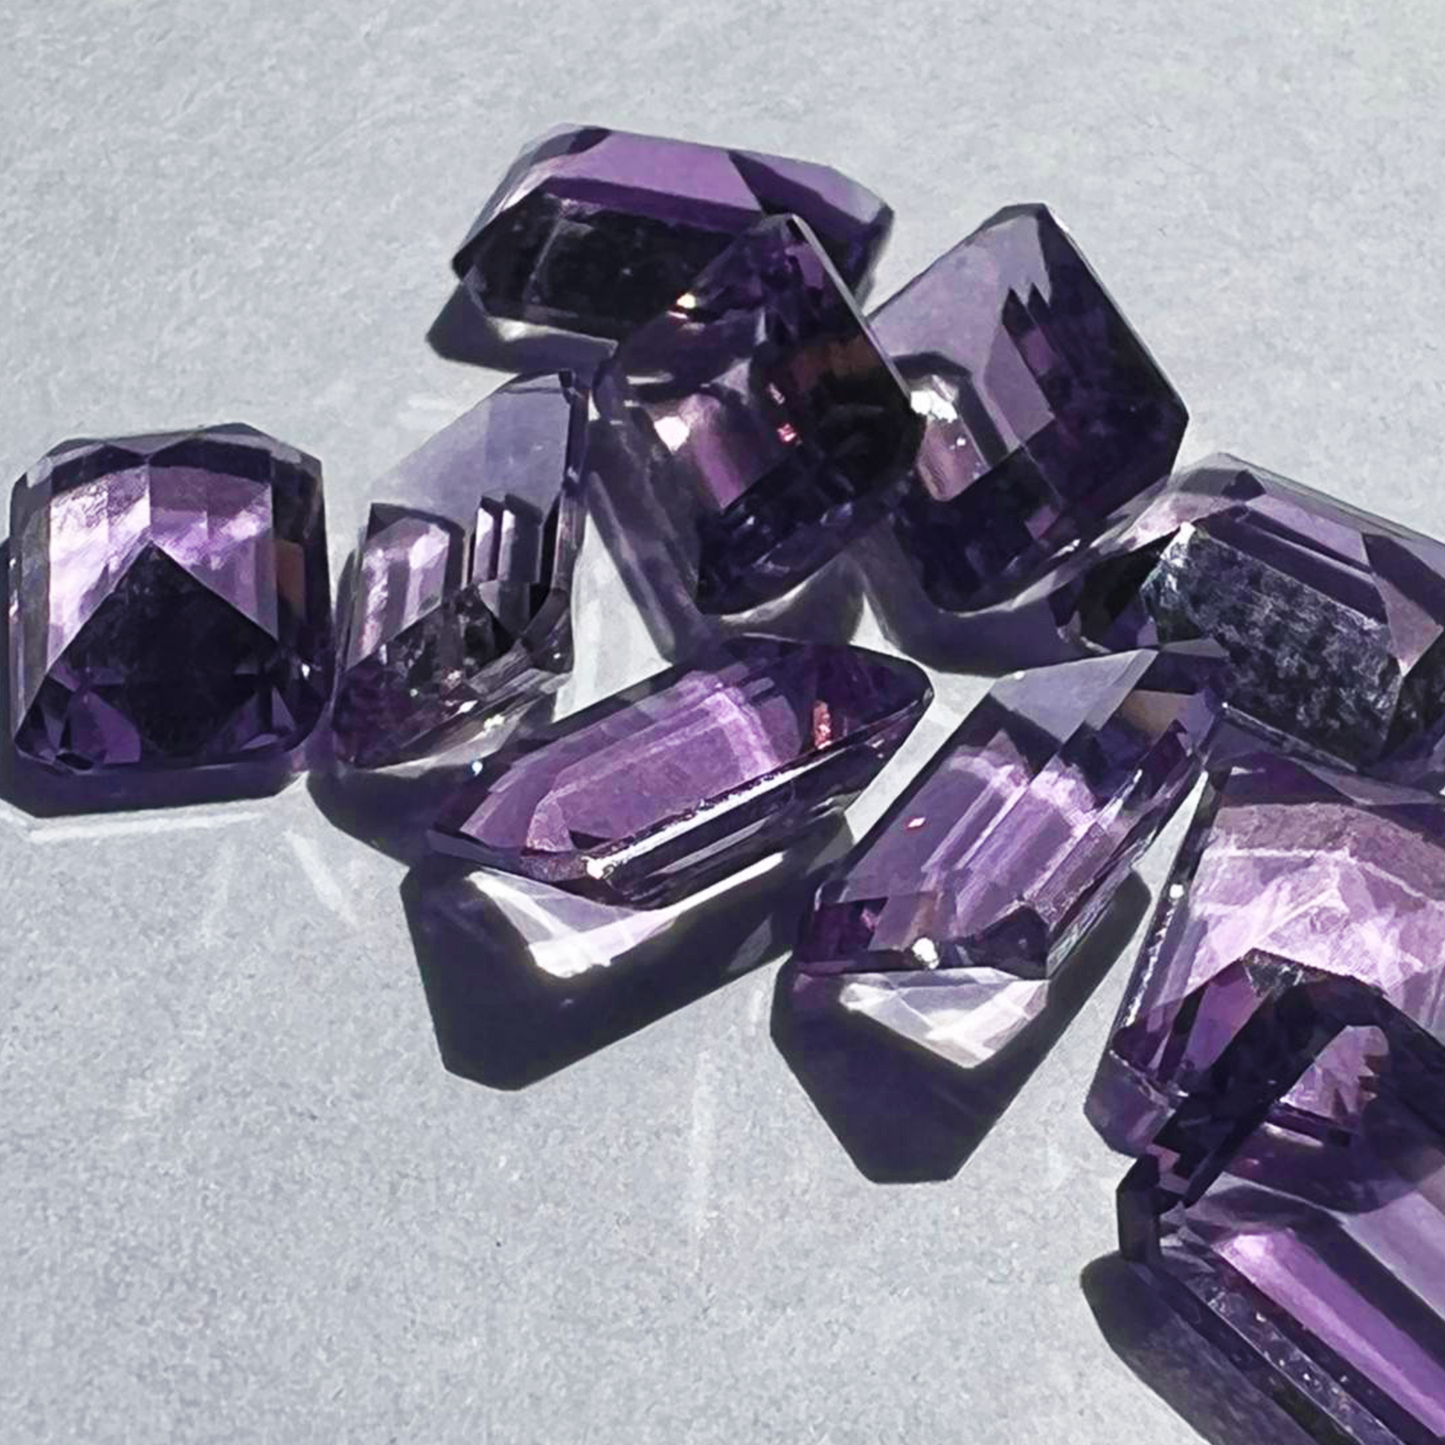 [Amethyst] hide and sparkle gold #exploring